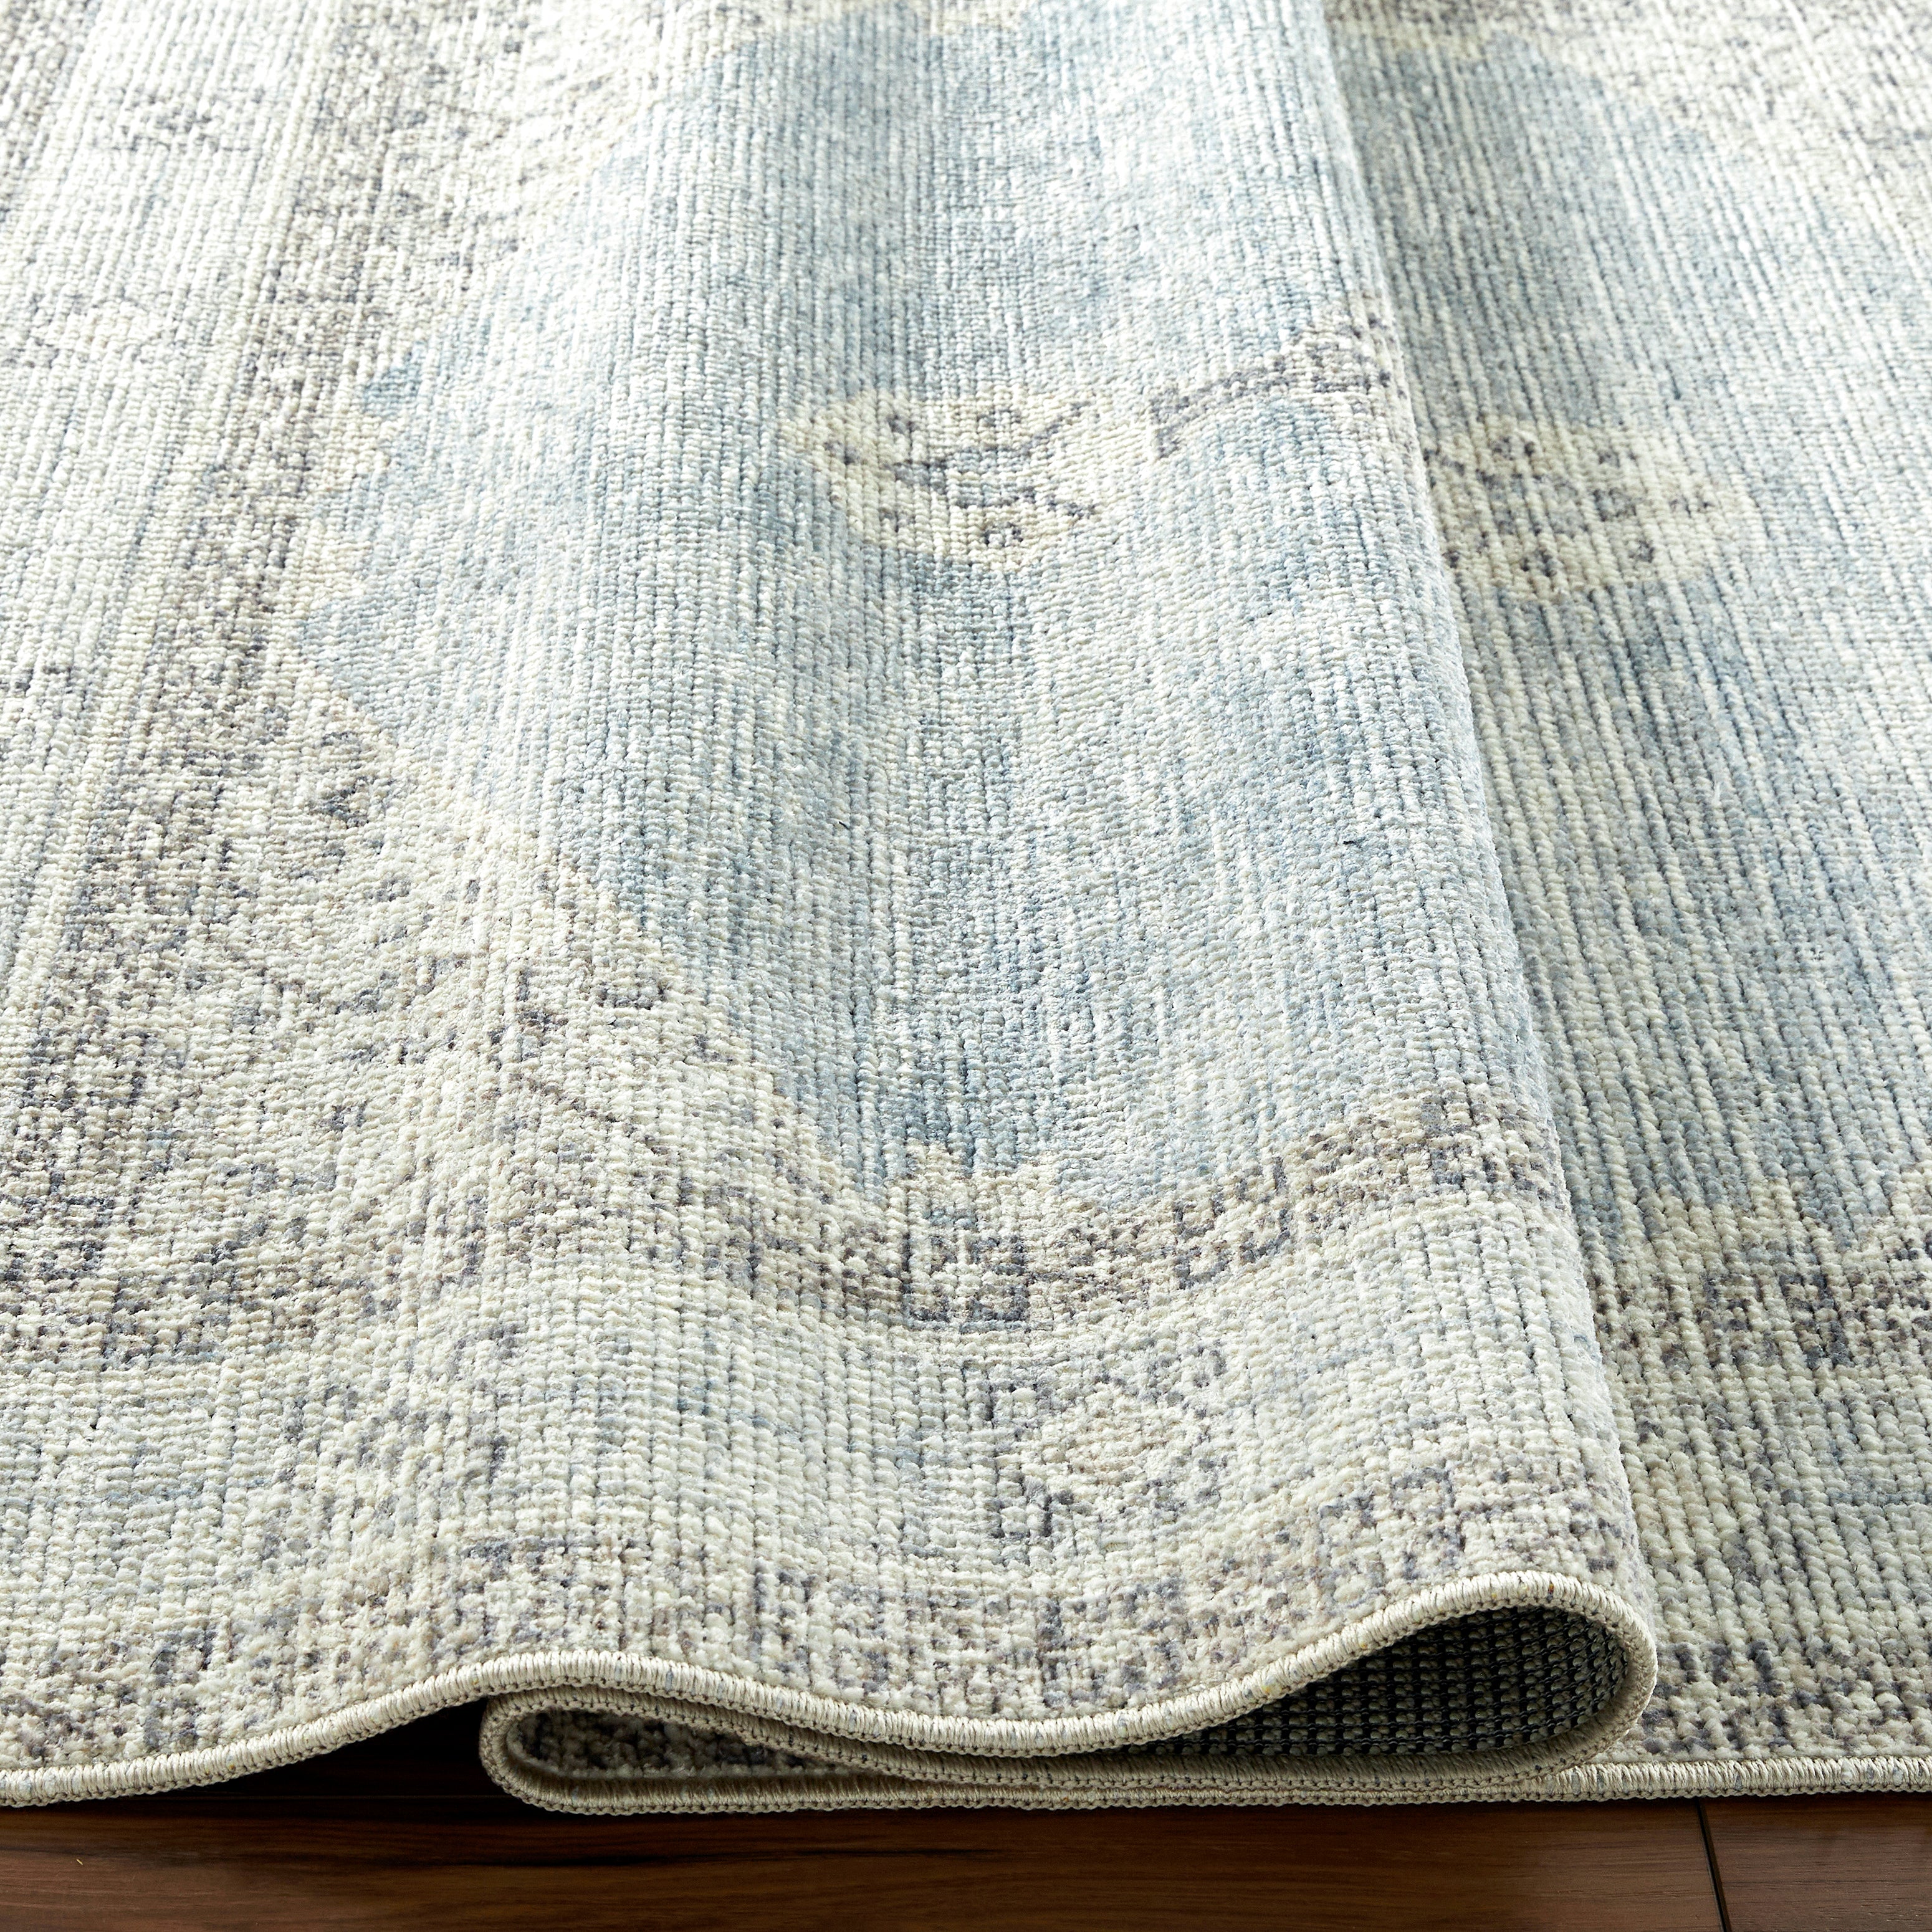 Brought to you by Becki Owens x Surya, the Lila Denim medallion area rug combines rich, detailed design with warm soft neutrals and tones to create an inviting space that will always feel familiar. Amethyst Home provides interior design, new construction, custom furniture, and area rugs in the Boston metro area.